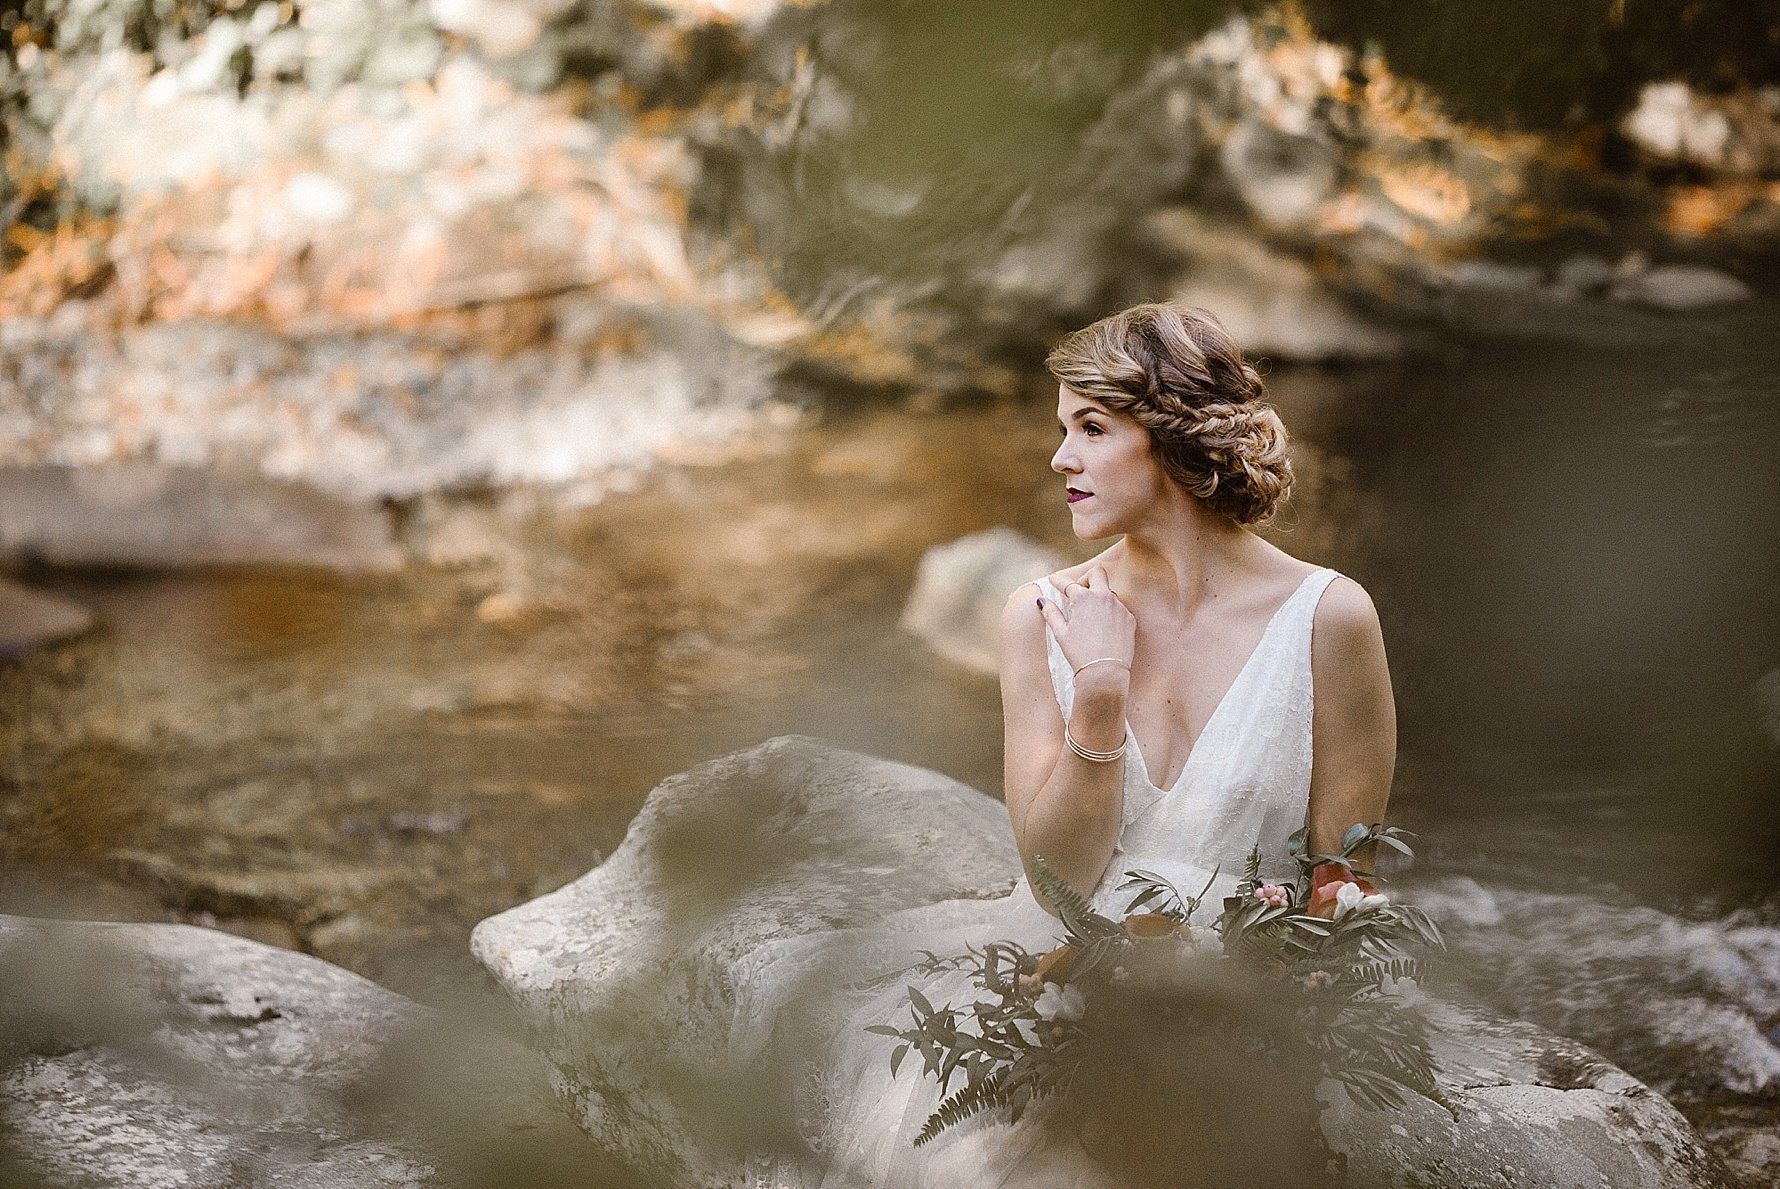 River Bridal Photos in the Smoky Mountains | Erin Morrison Photography www.erinmorrisonphotography.com